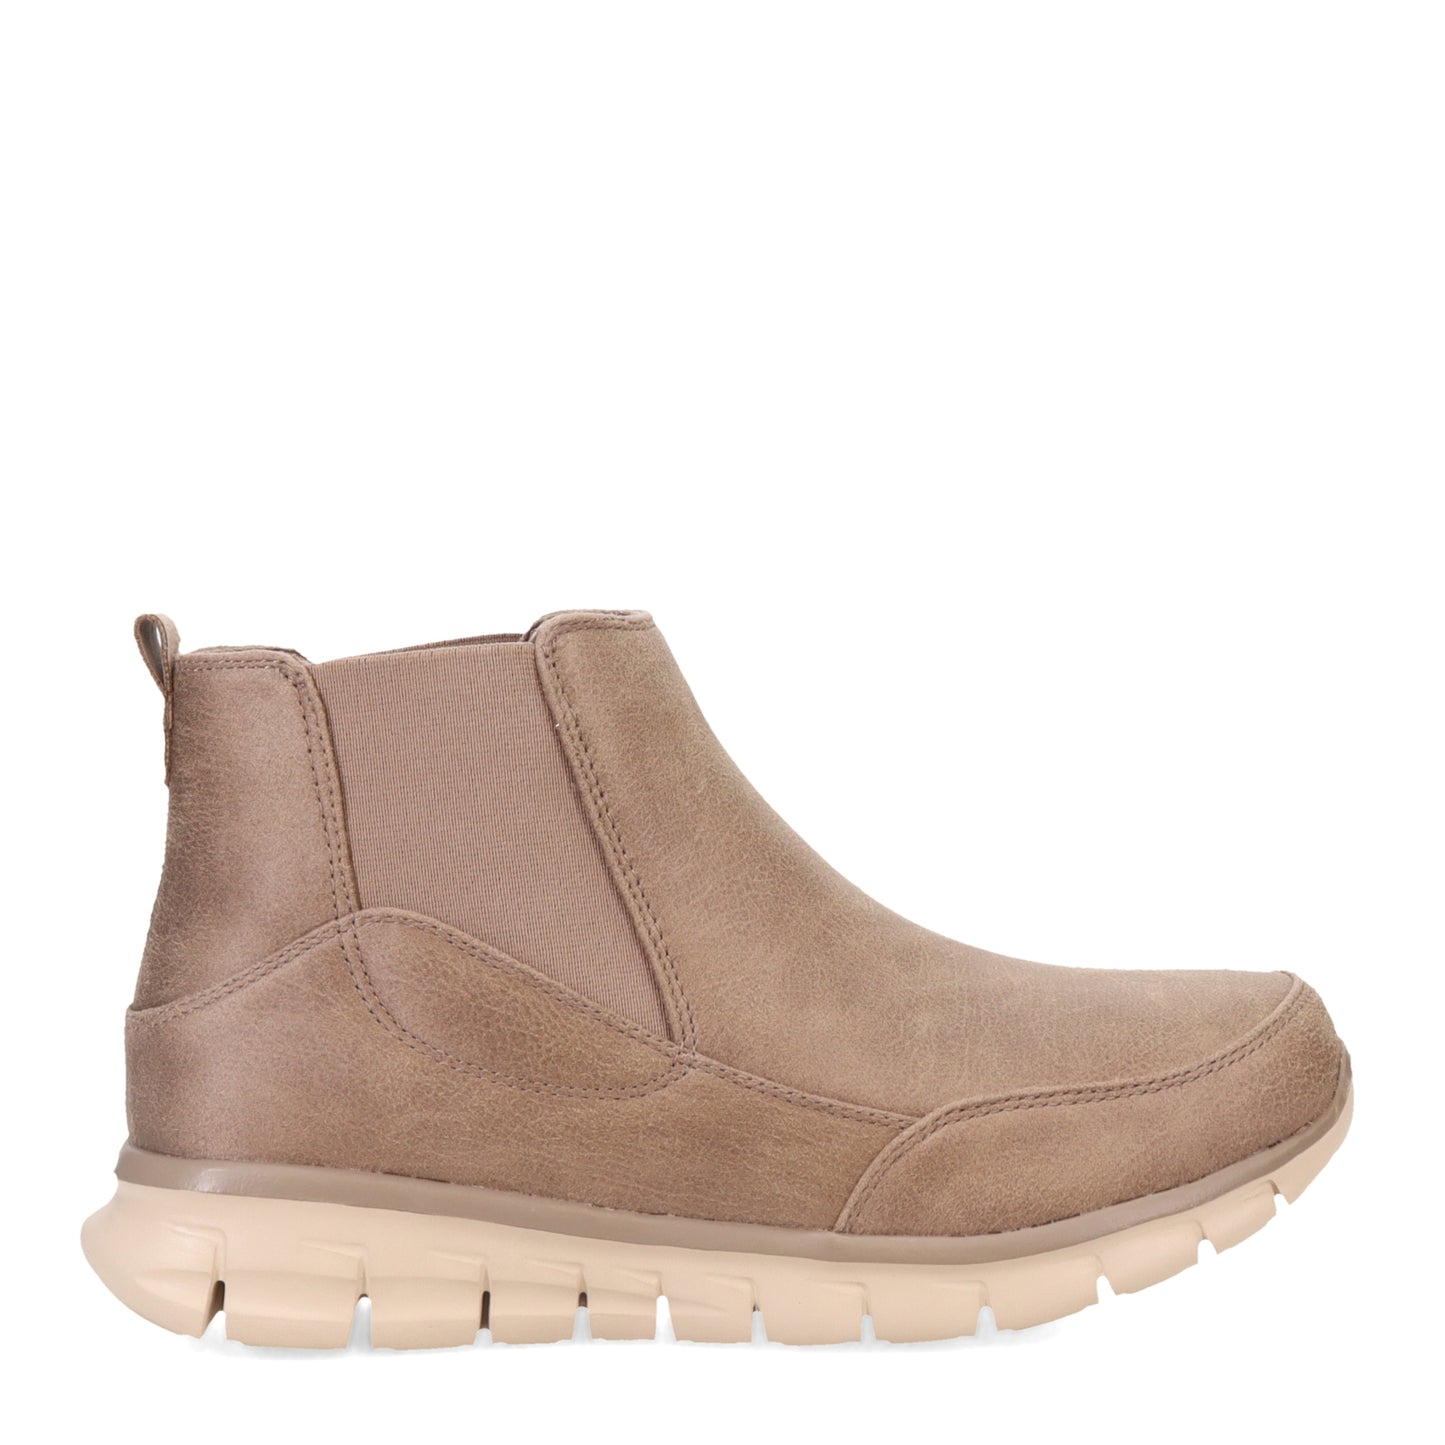 Peltz Shoes  Women's Skechers Synergy Chelsea Boot Taupe 167934-TPE